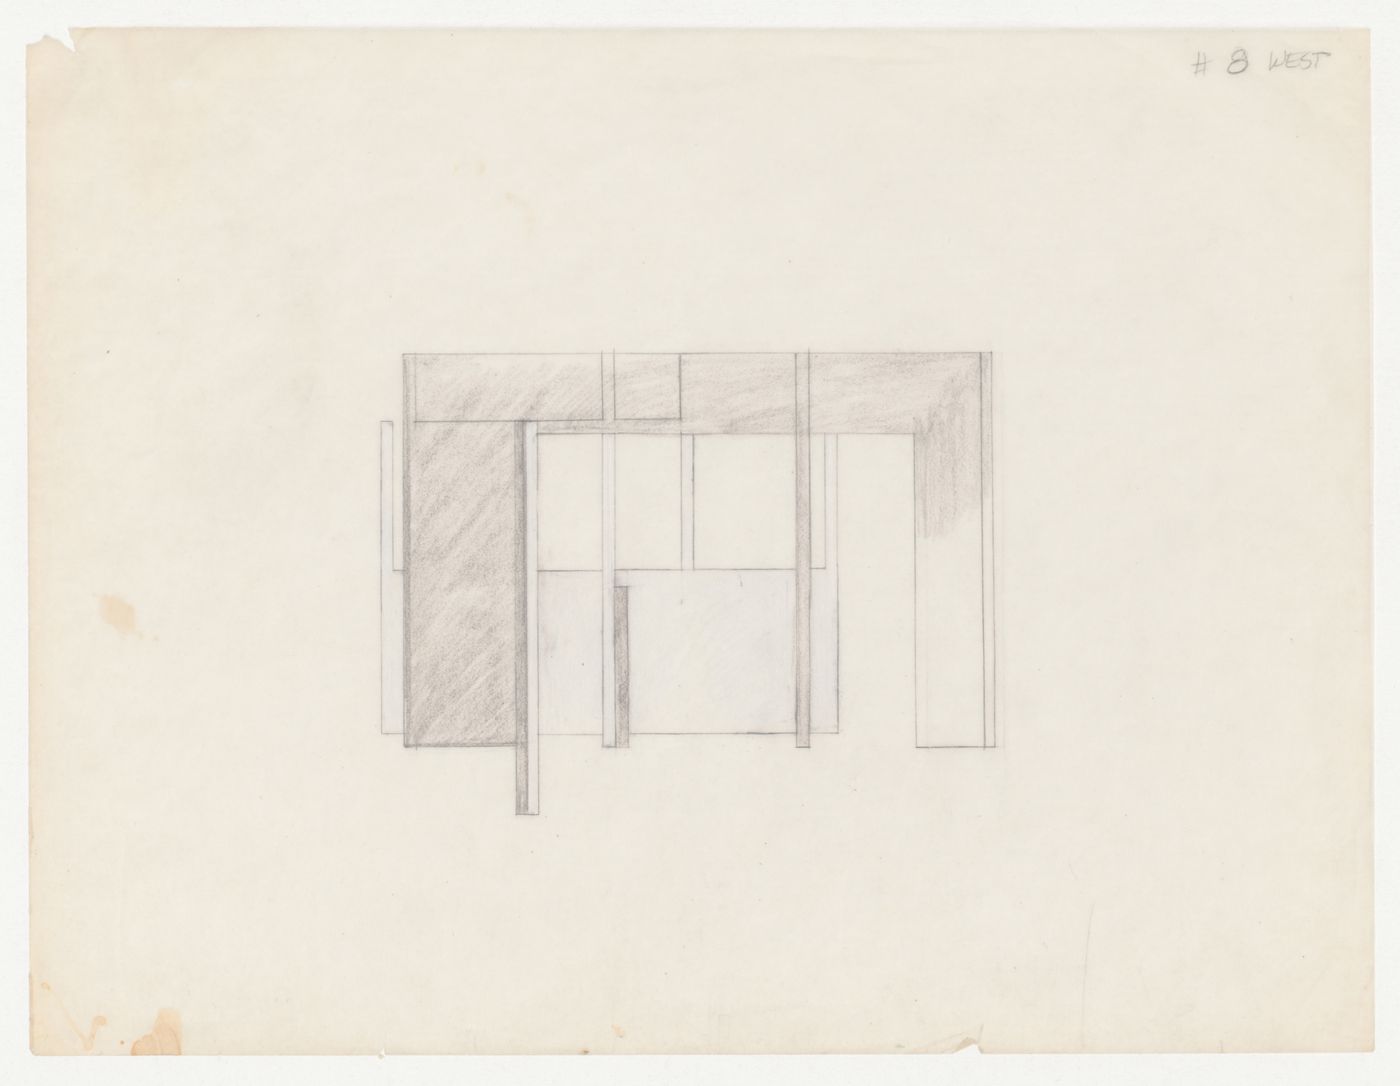 Sketch elevation for House VI, Cornwall, Connecticut